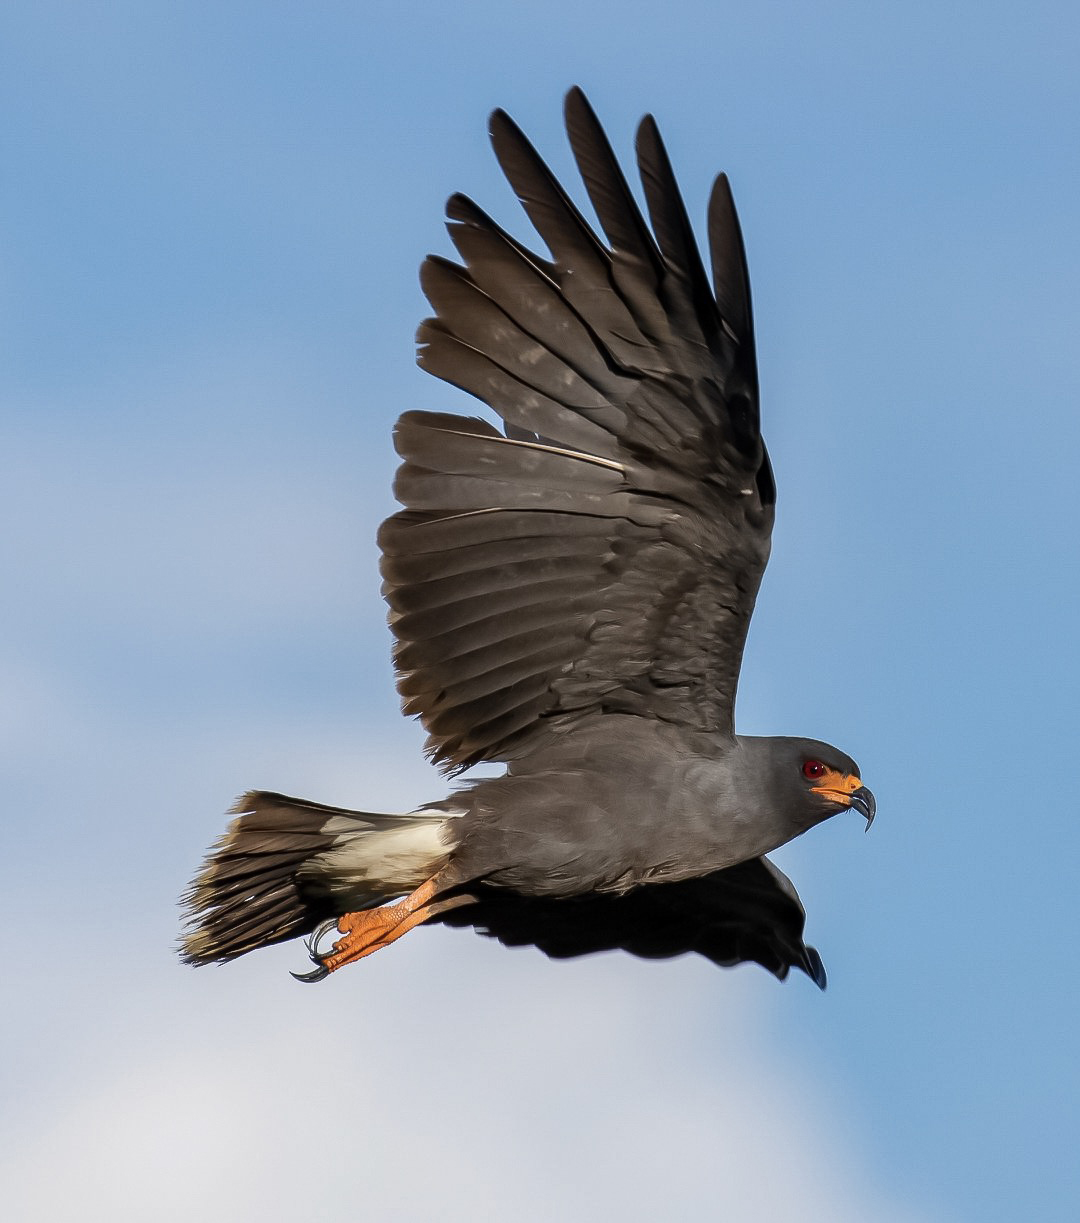 photo of a snail kite flying in a blue sky